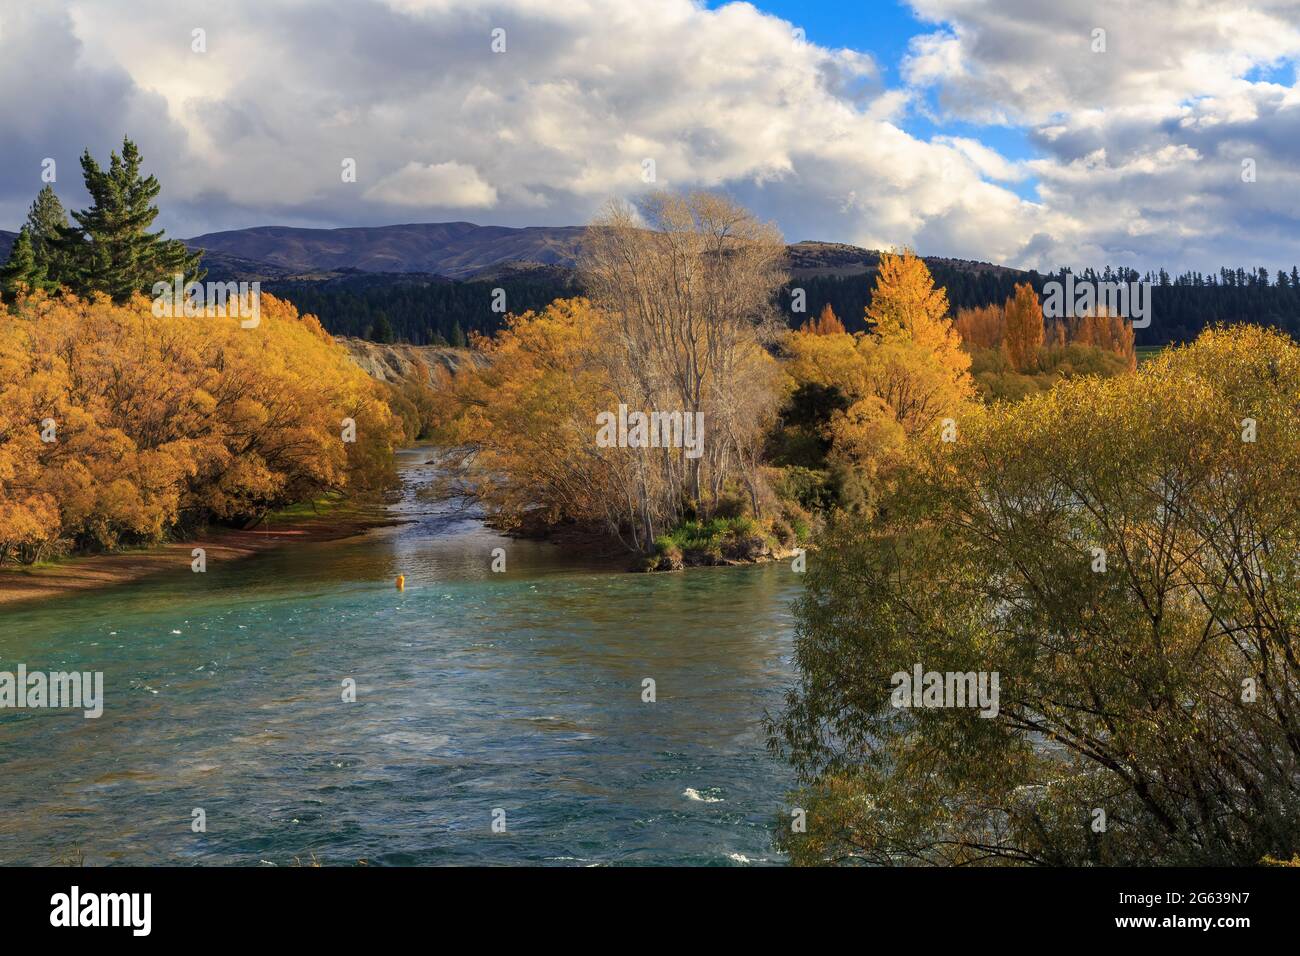 The Clutha River, New Zealand, in autumn Stock Photo